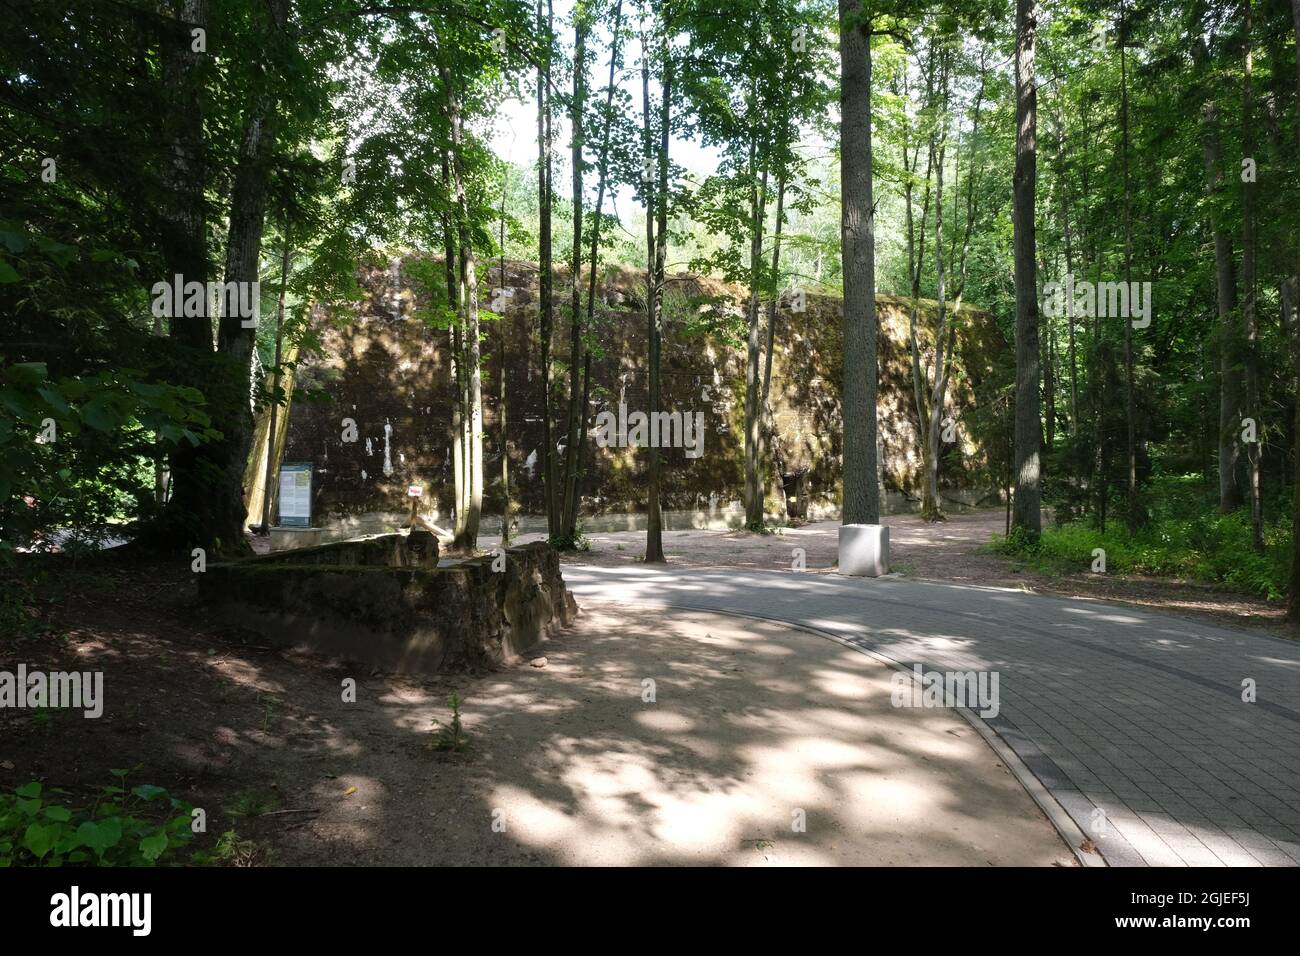 Ketrzyn, Gierloz, Poland - July 19, 2021: shelter for guests at the Wolf's Lair (Wilczy Szaniec, Wolfsschanze) built by the Organisation Todt. Stock Photo